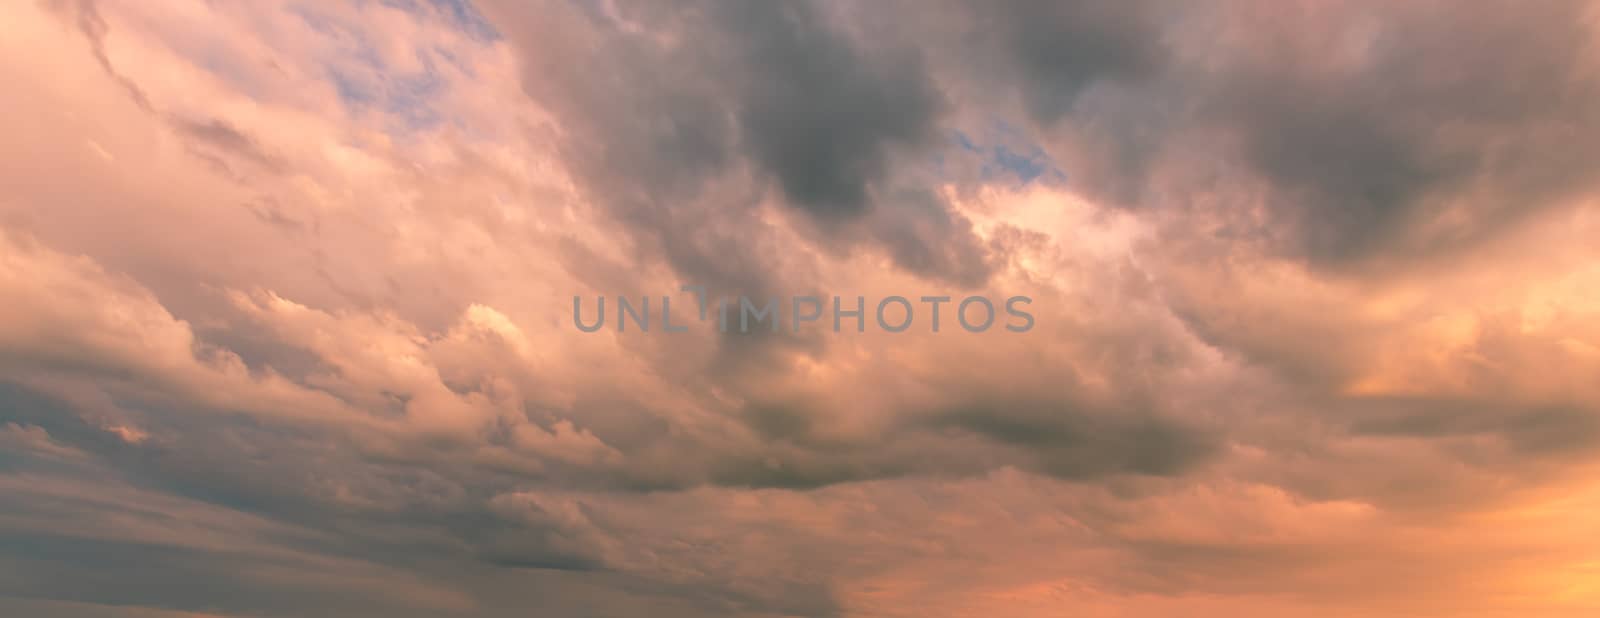 Cloudy sky at sunset or sunrise with sunlight. Abstract background for design.